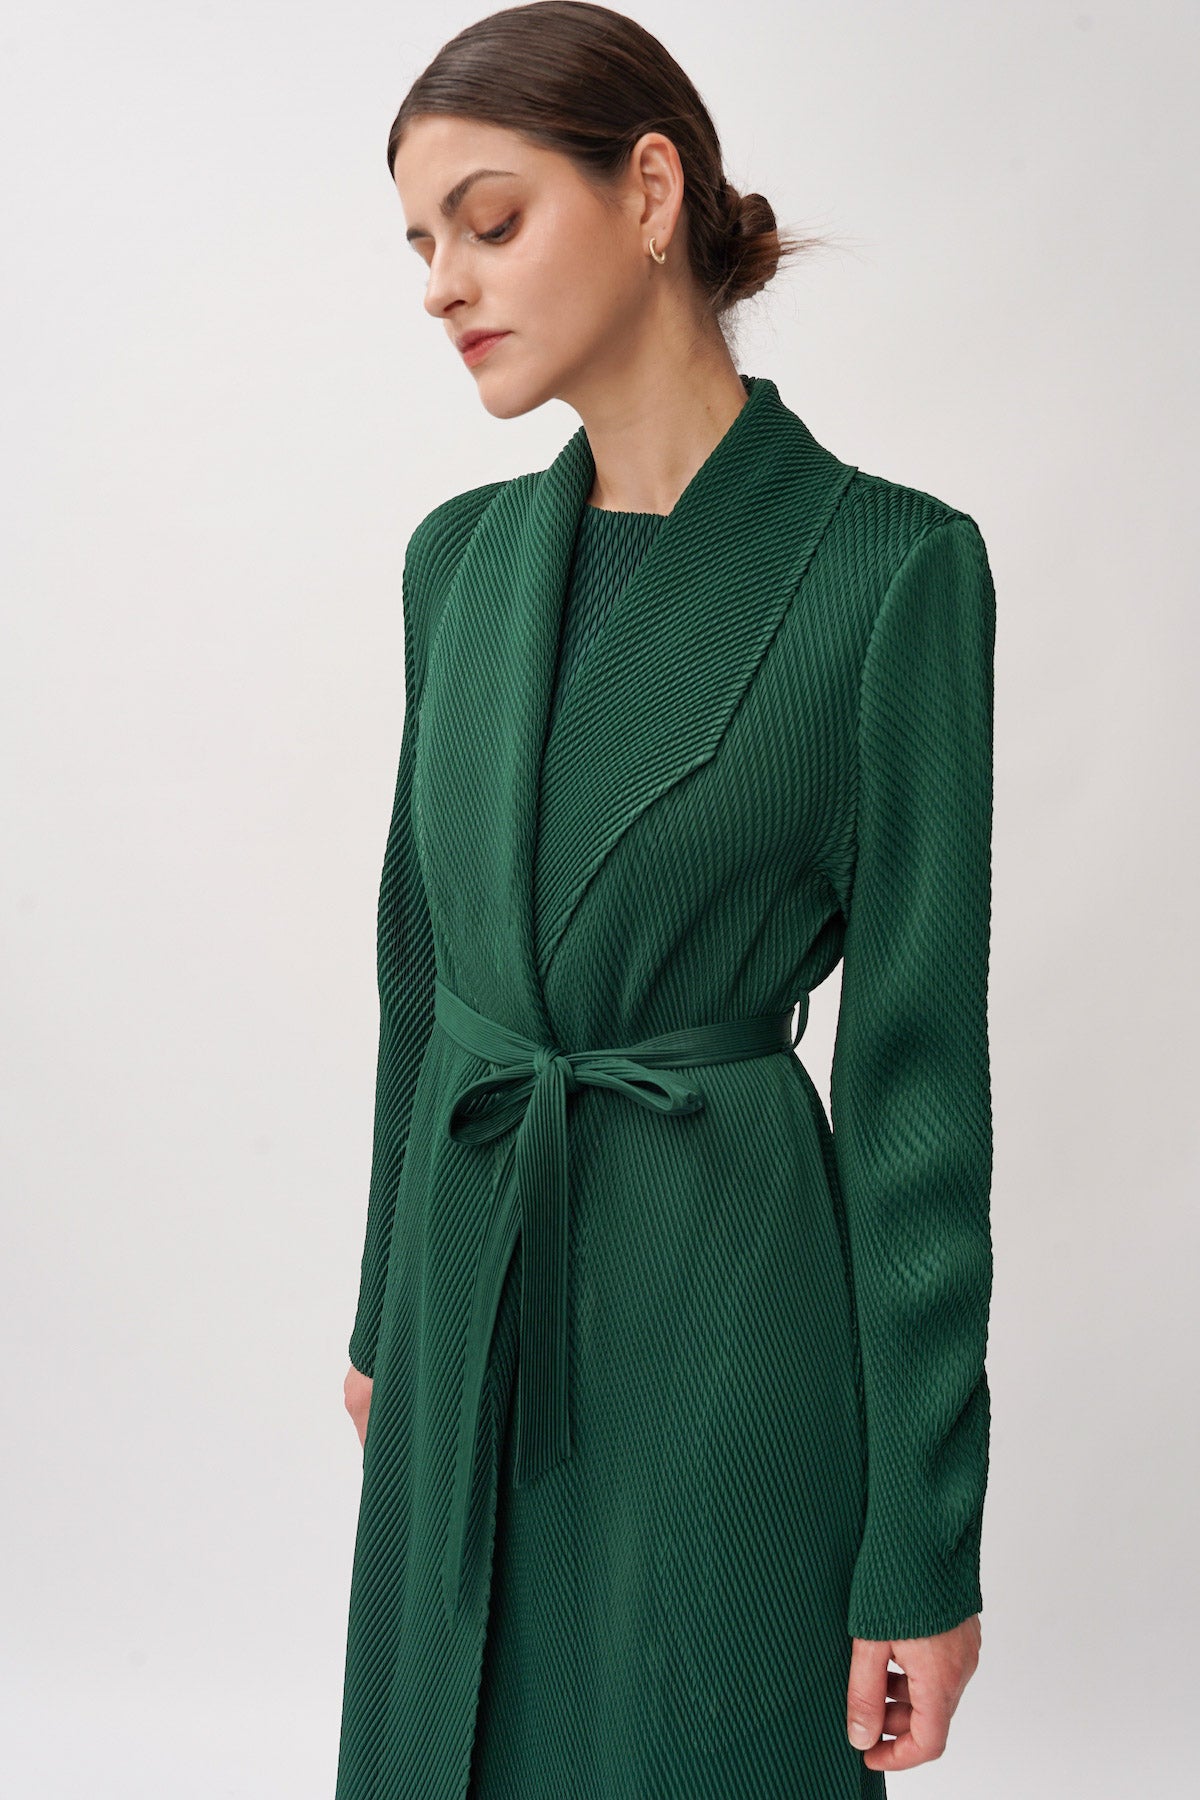 Caleta Pleats Outer In Forest Green